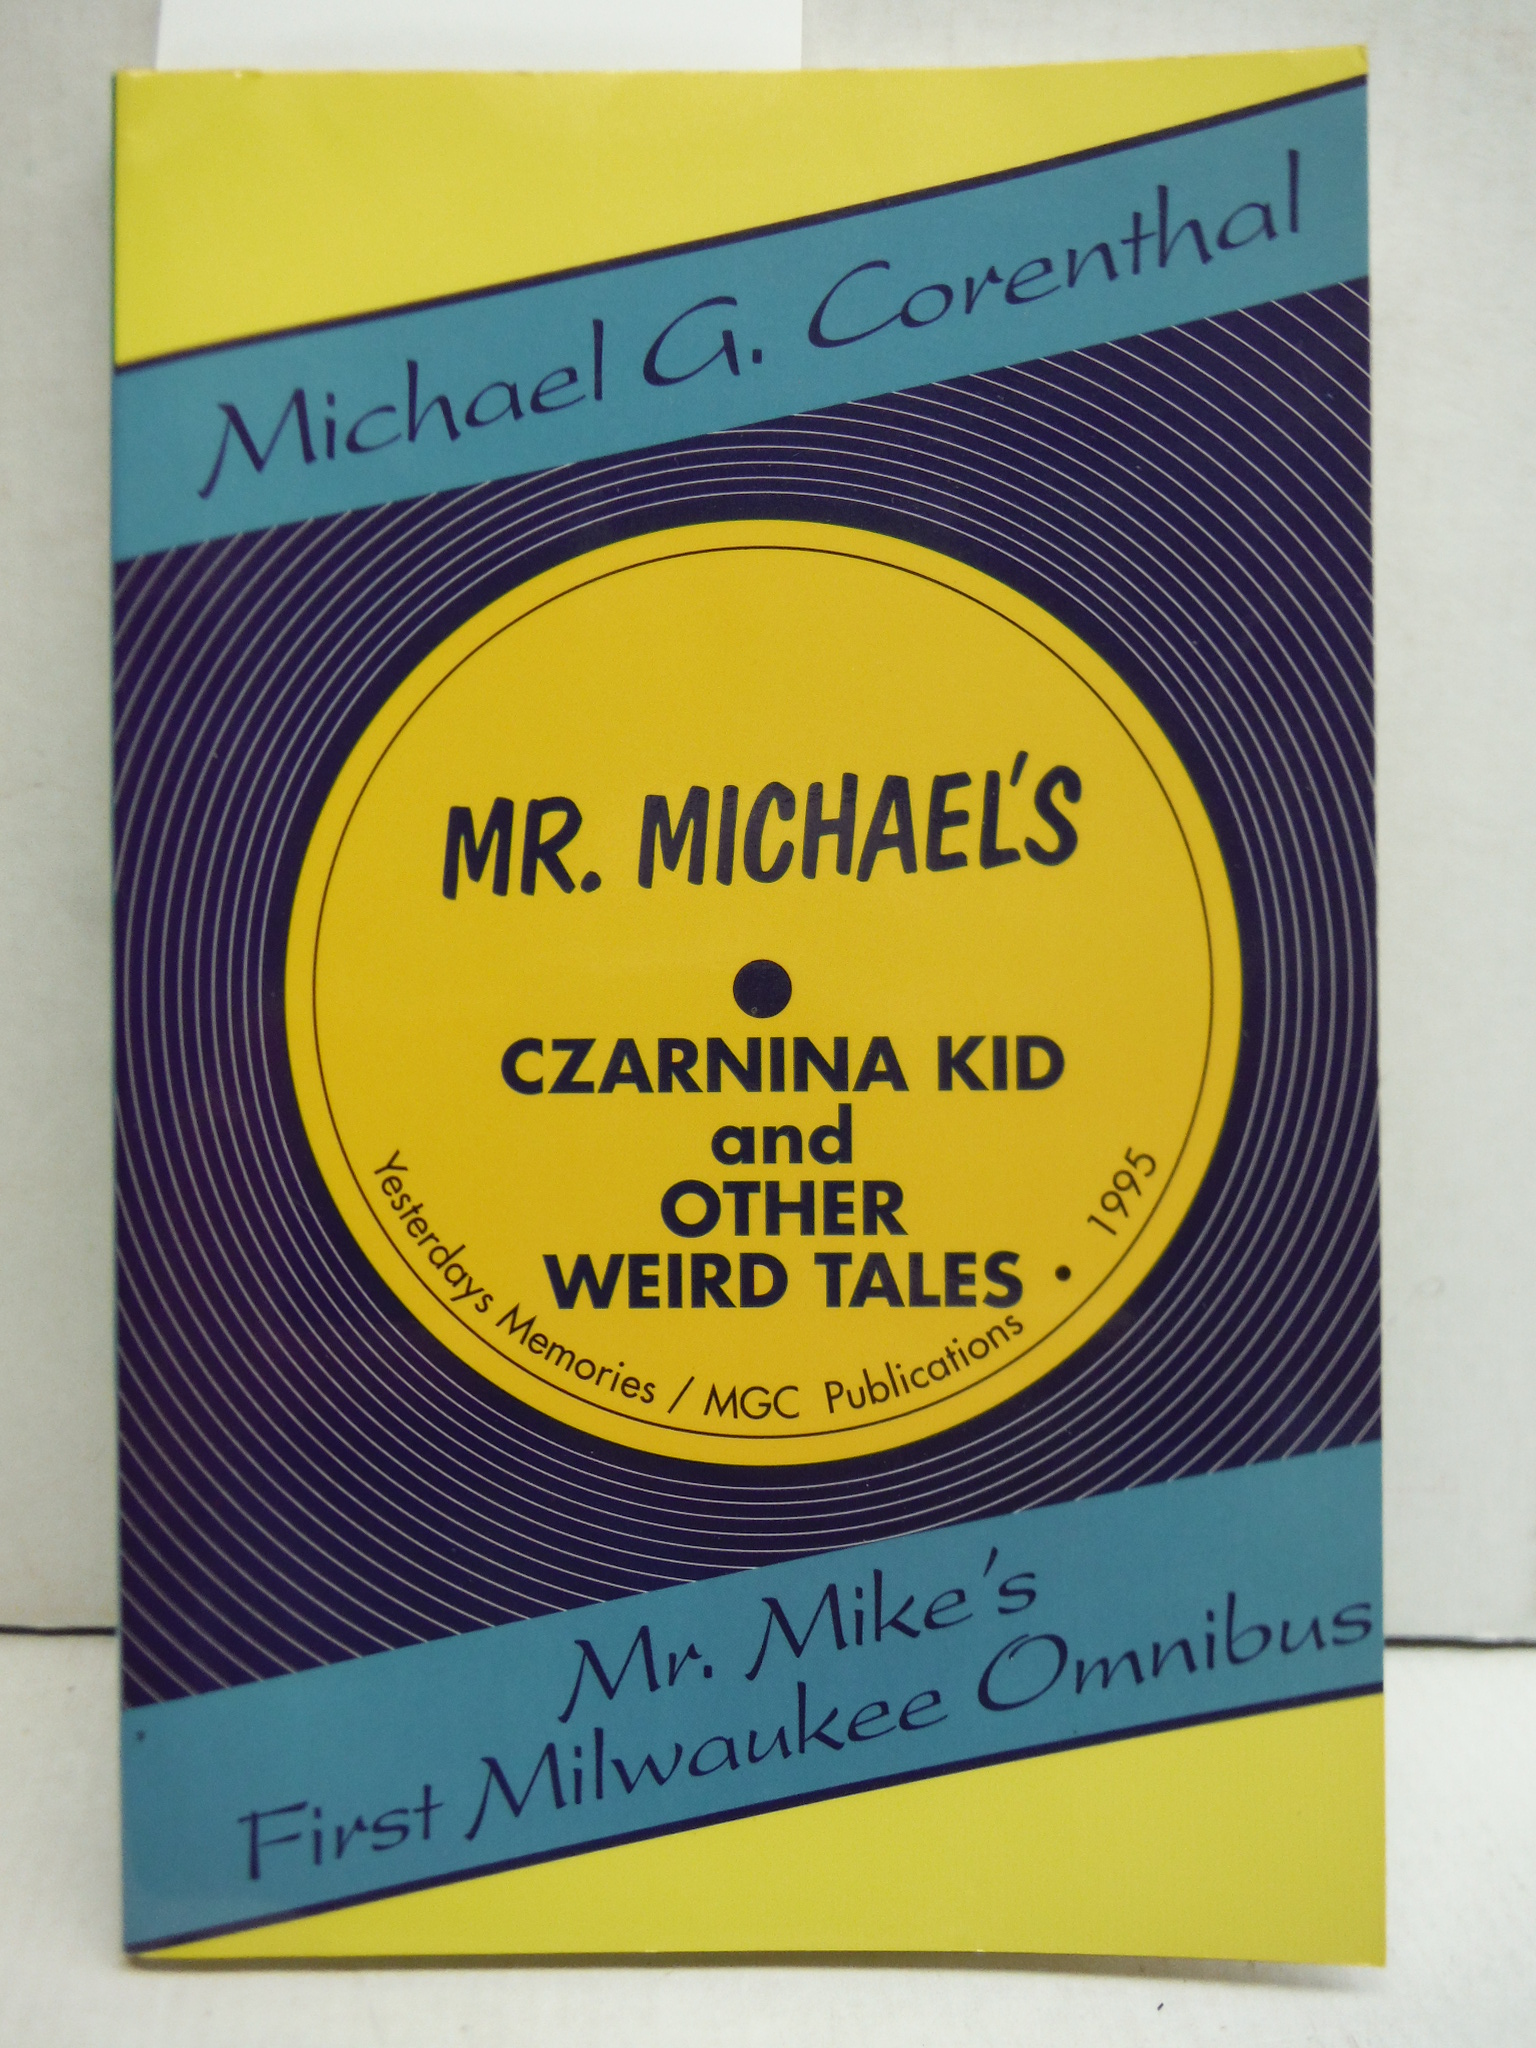 Mr. Michael's Czarnina Kid and Other Weird Tales